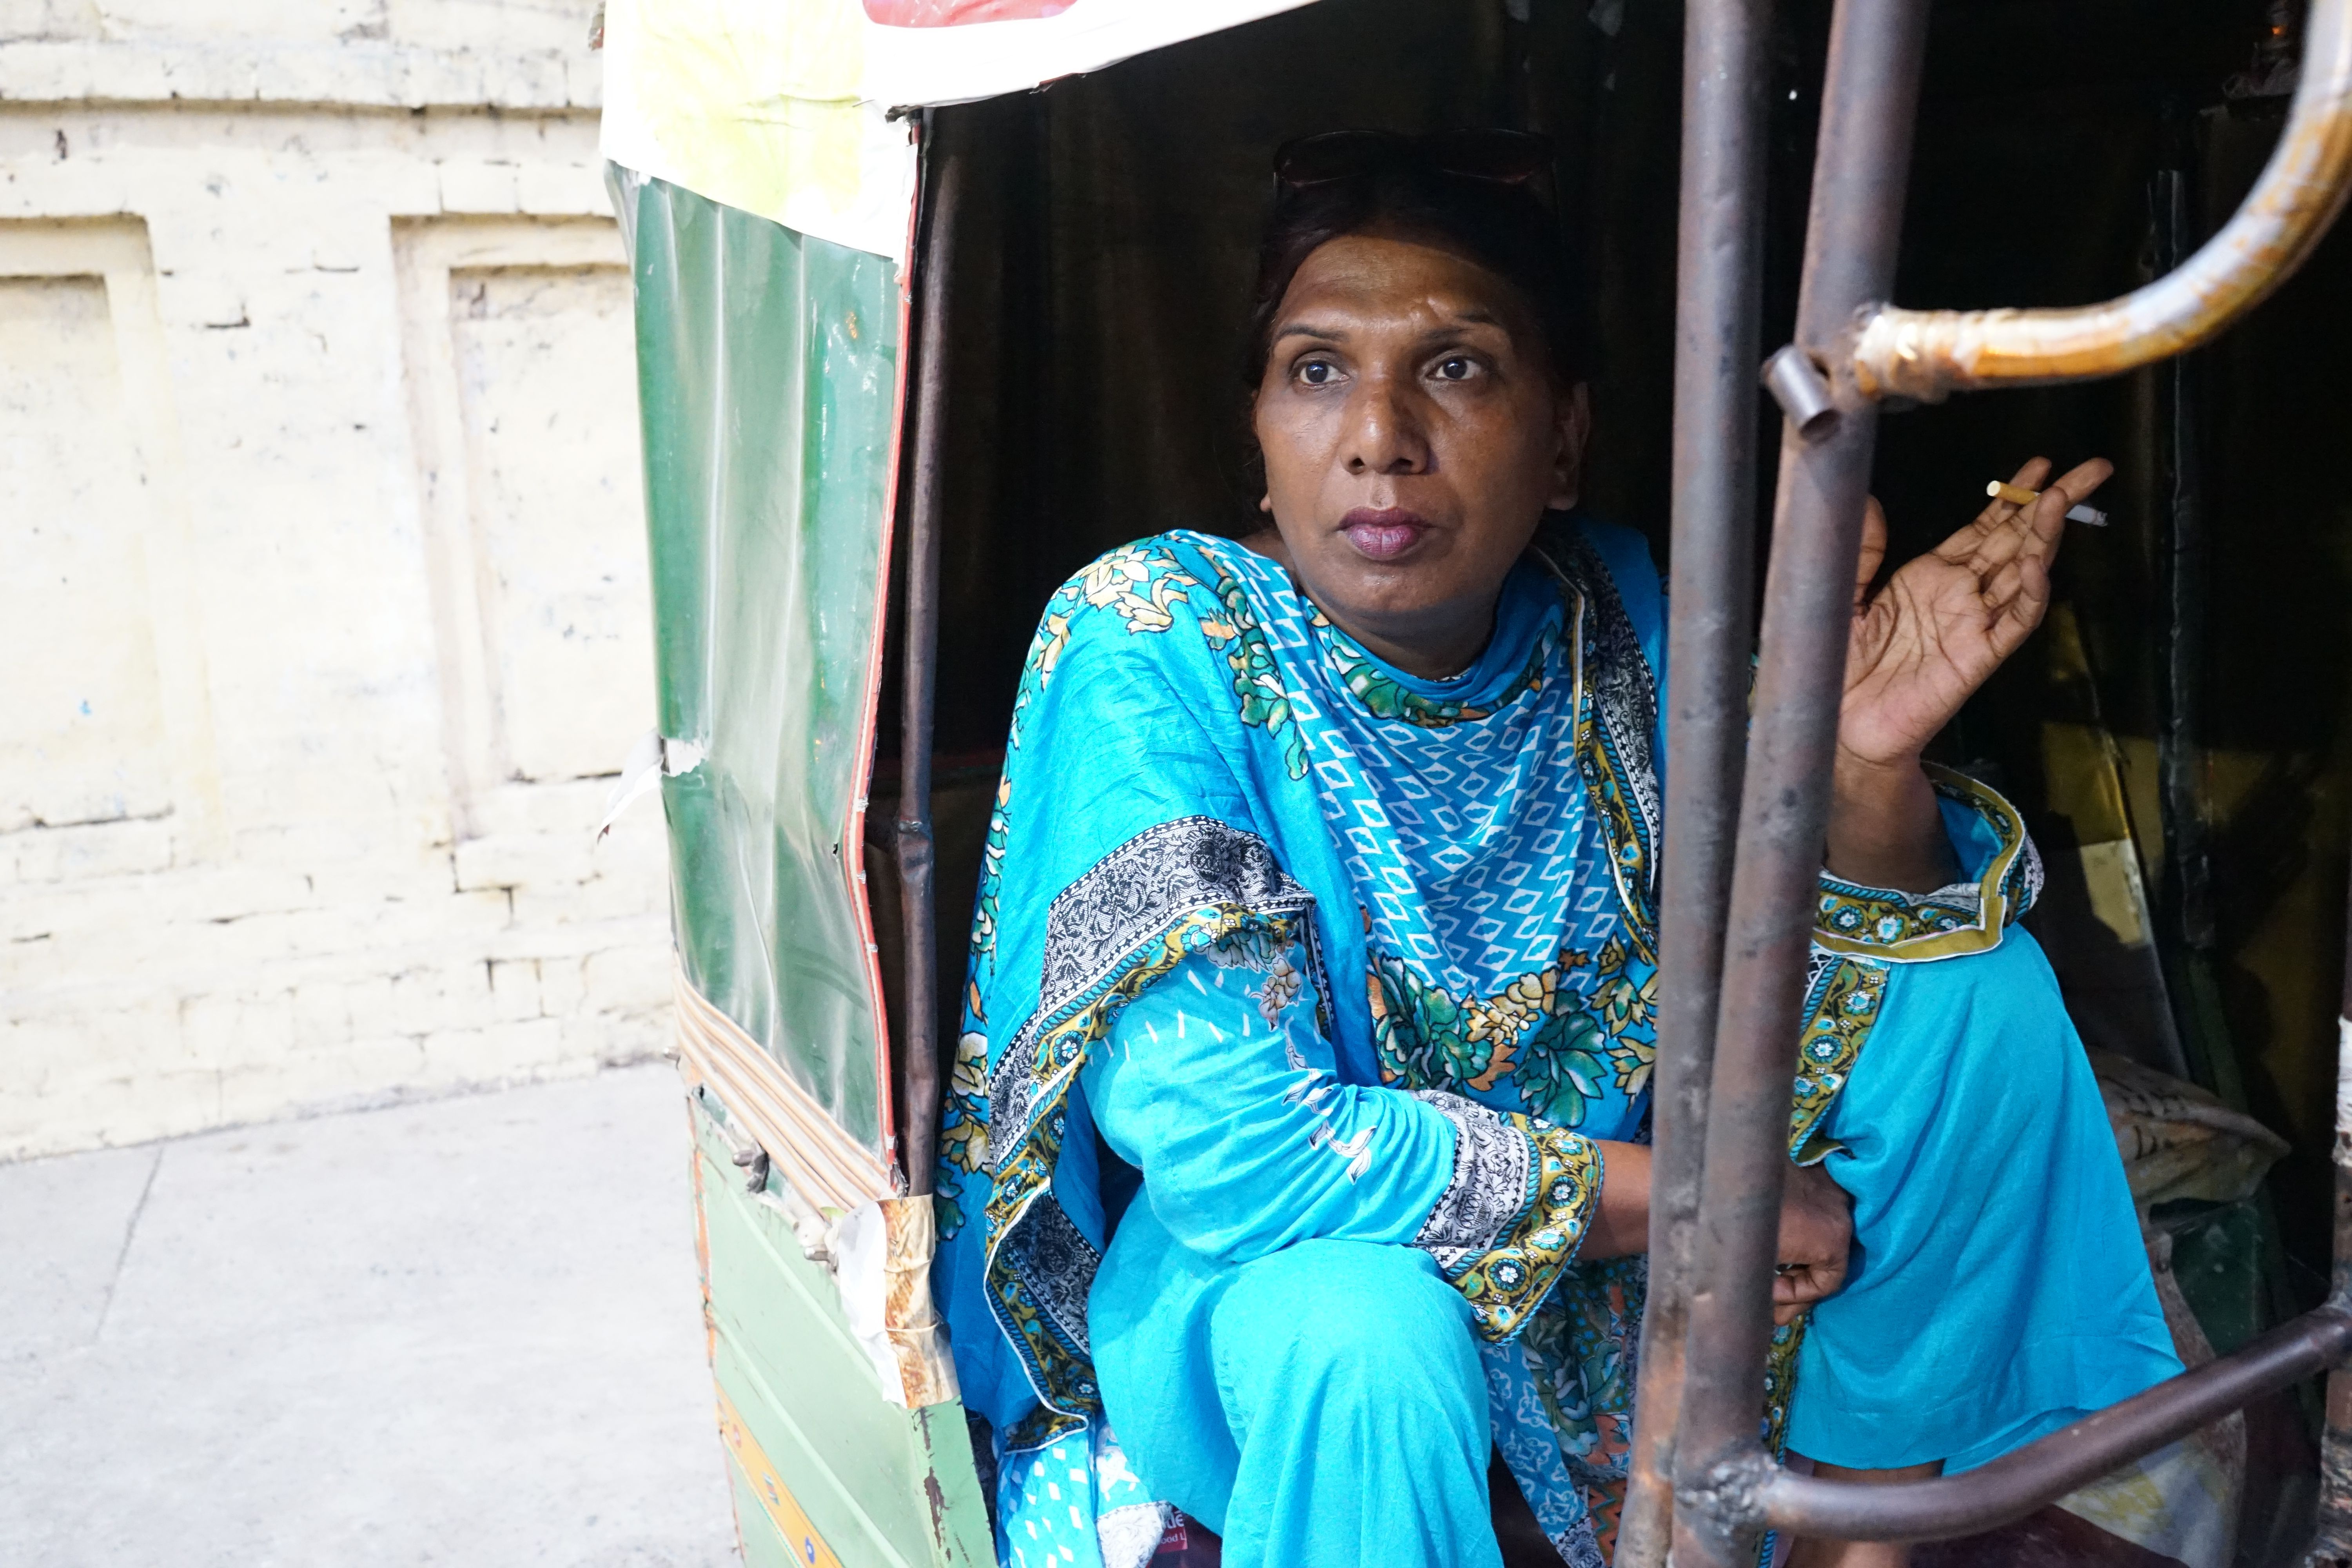 Ashi Jaan, age 45, takes a break from the protest to sit and smoke a cigarette while chatting with the rickshaw driver. Image by Ikra Javed. Pakistan, 2016.